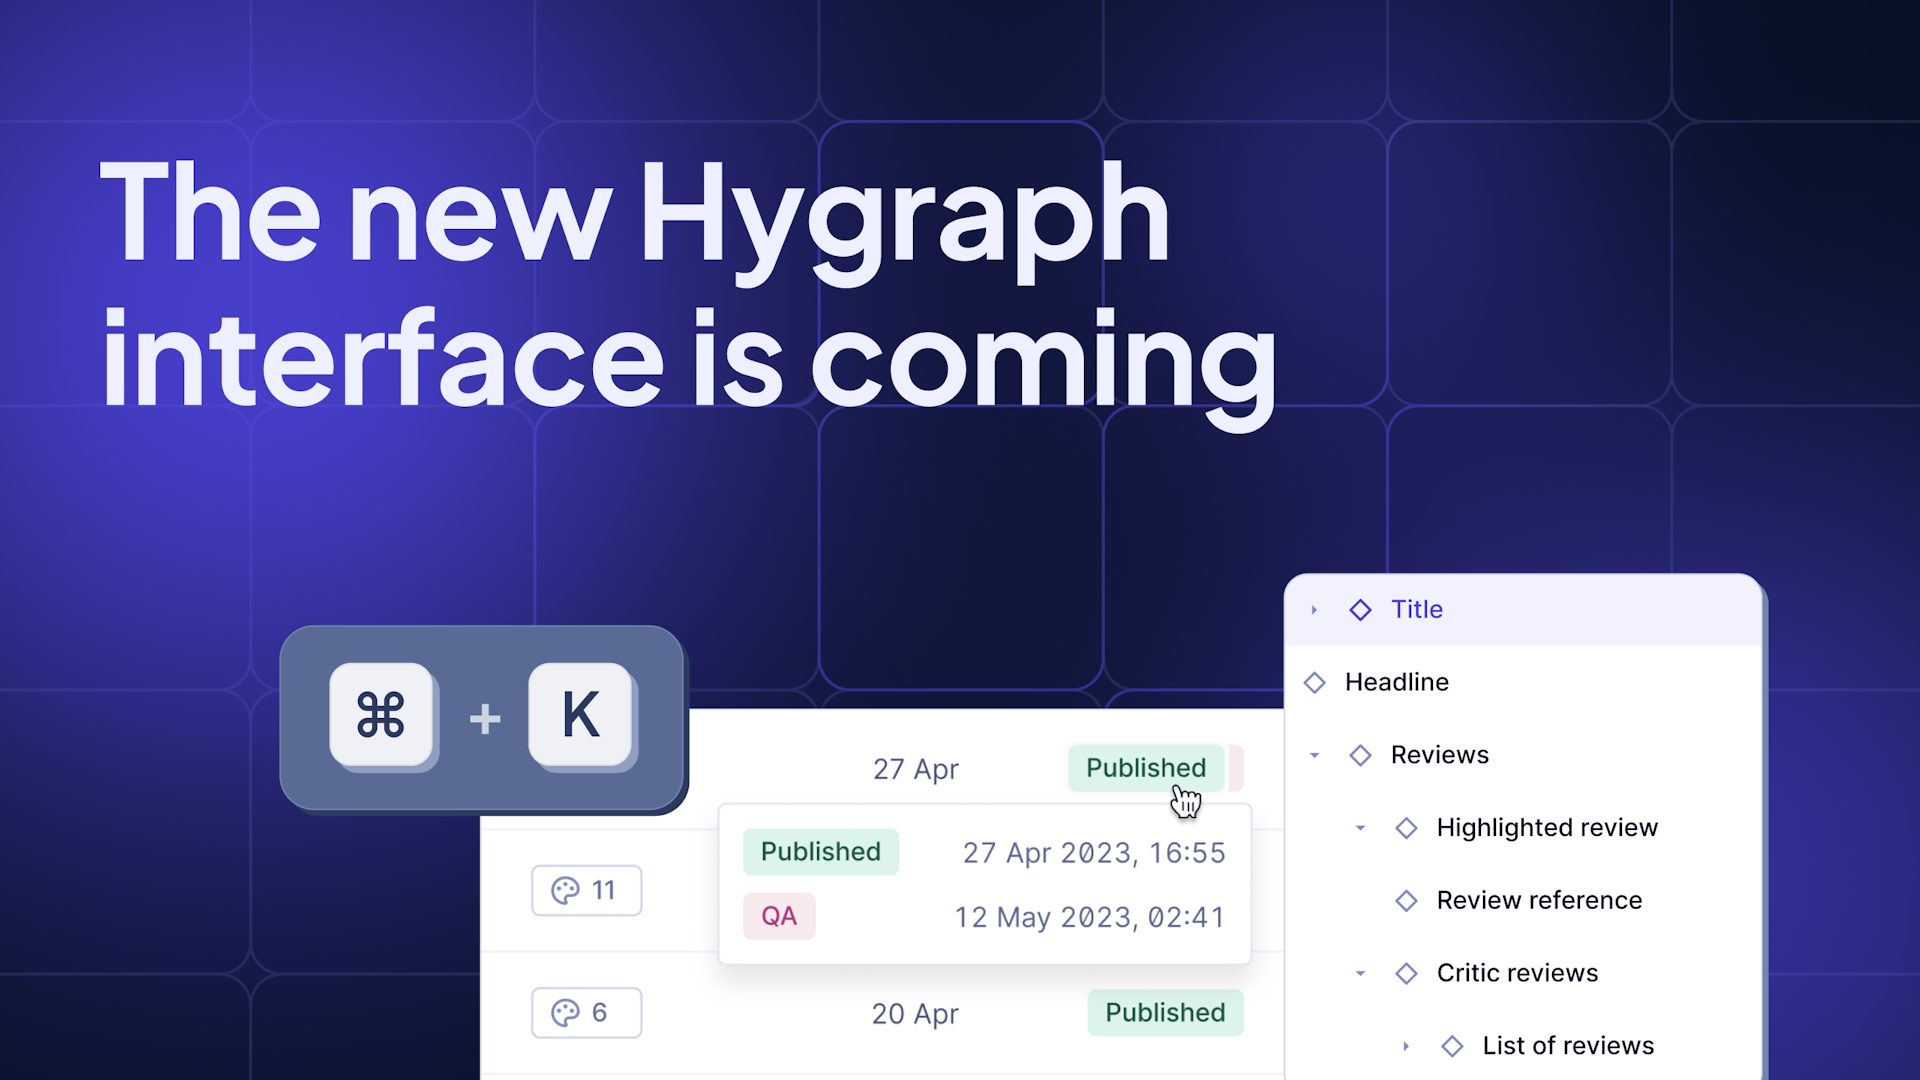 The new Hygraph interface is coming